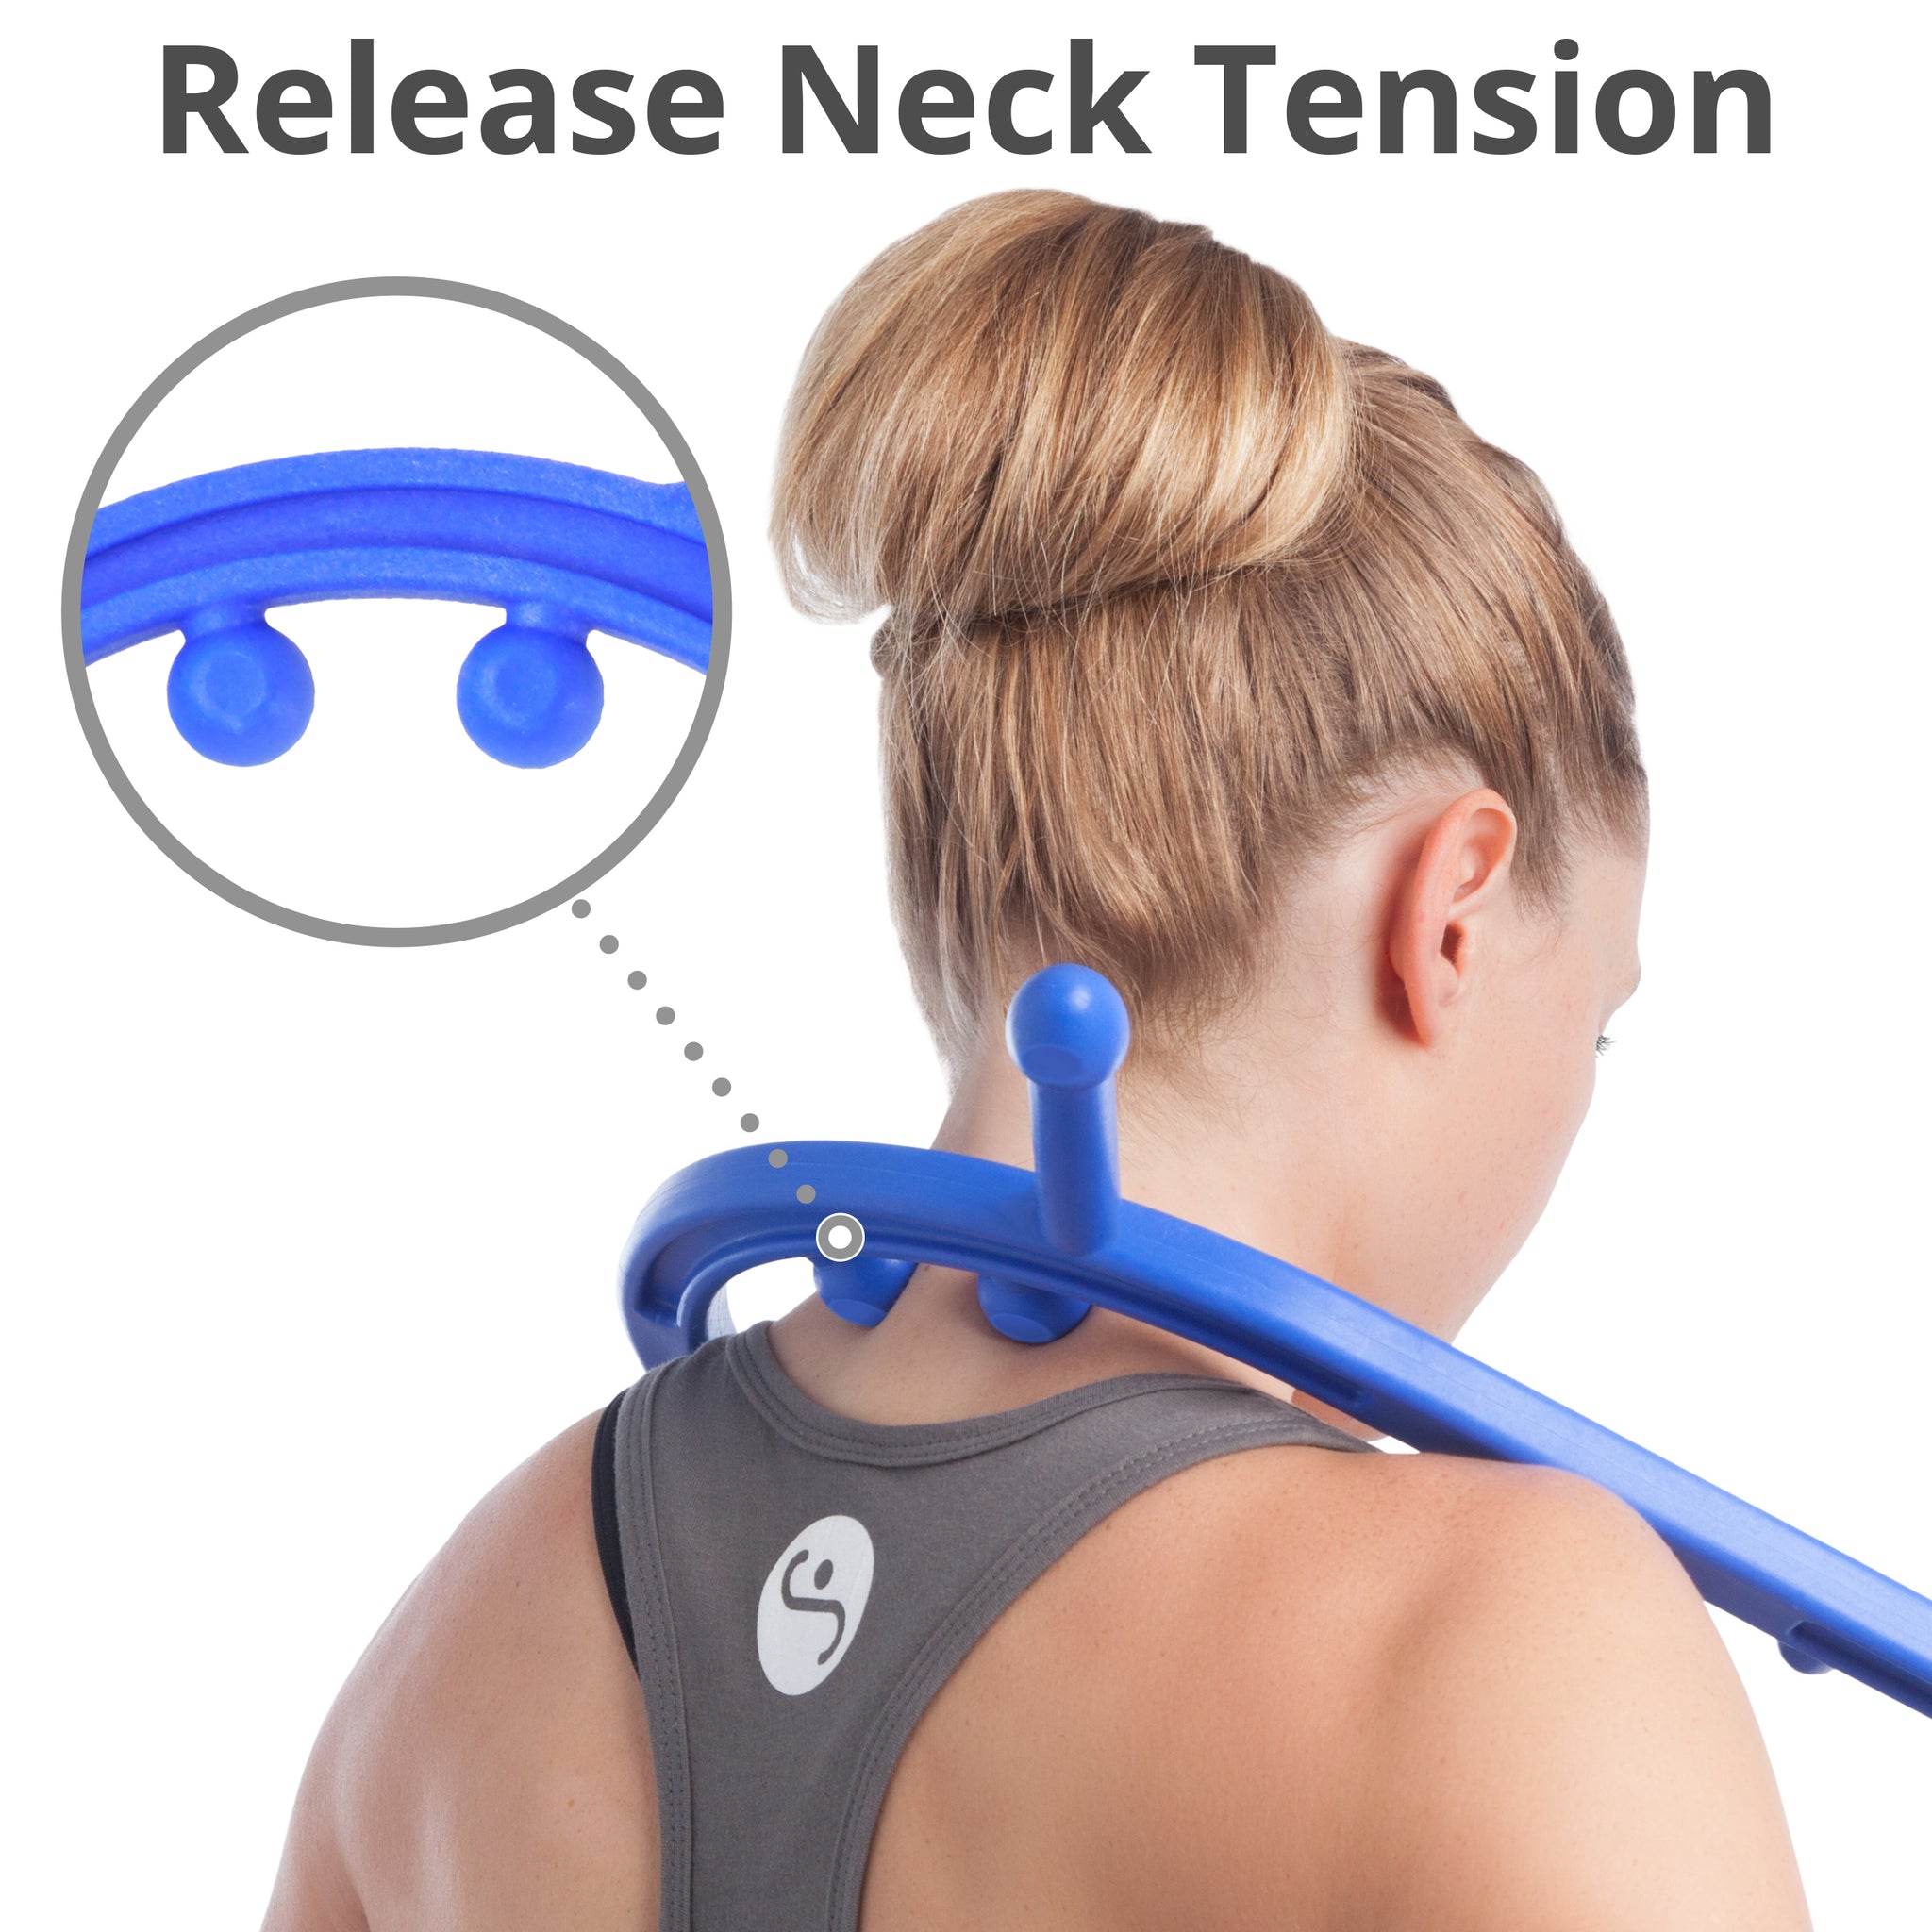 As one of the online sales mall Body Back Buddy Headache and Tension Relief  Bundle, neck tens